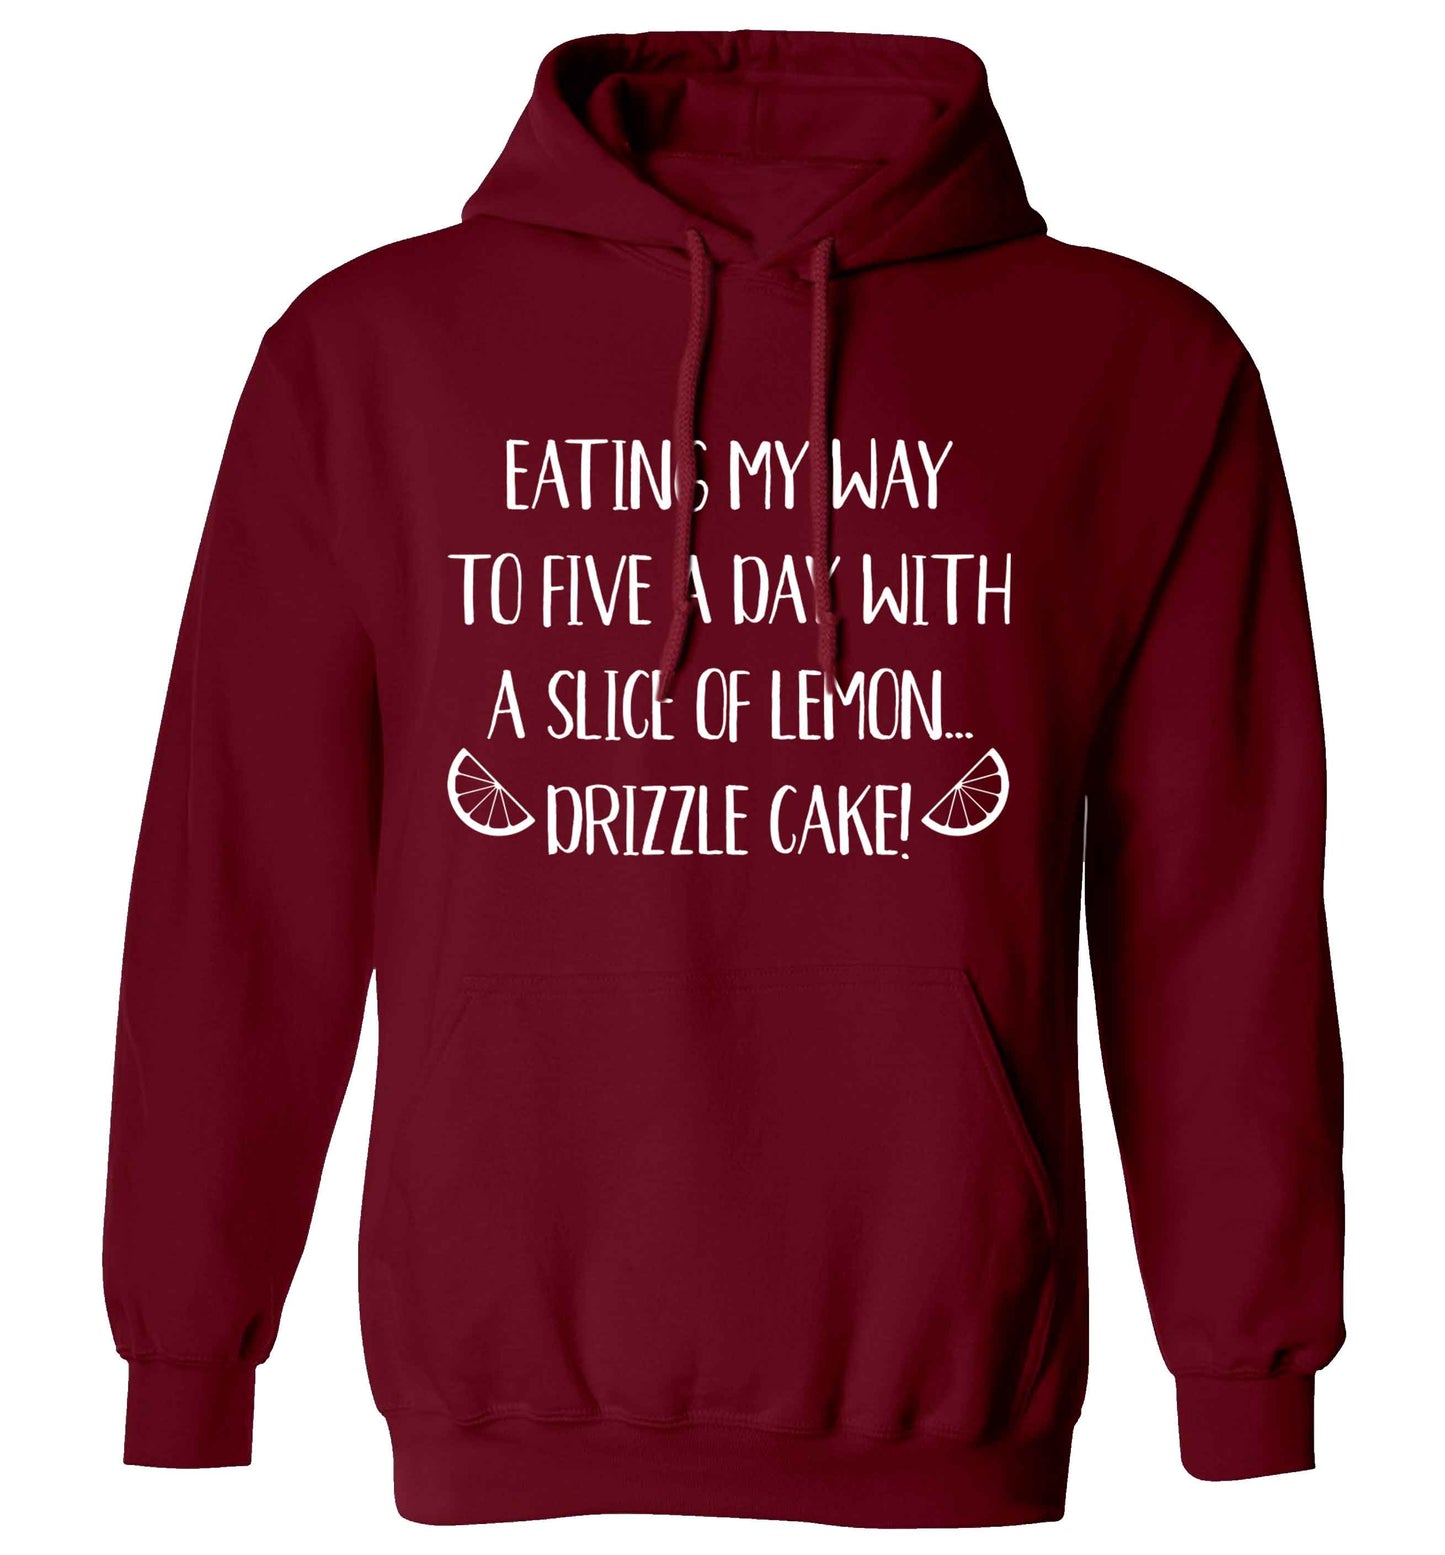 Eating my way to five a day with a slice of lemon drizzle cake day adults unisex maroon hoodie 2XL